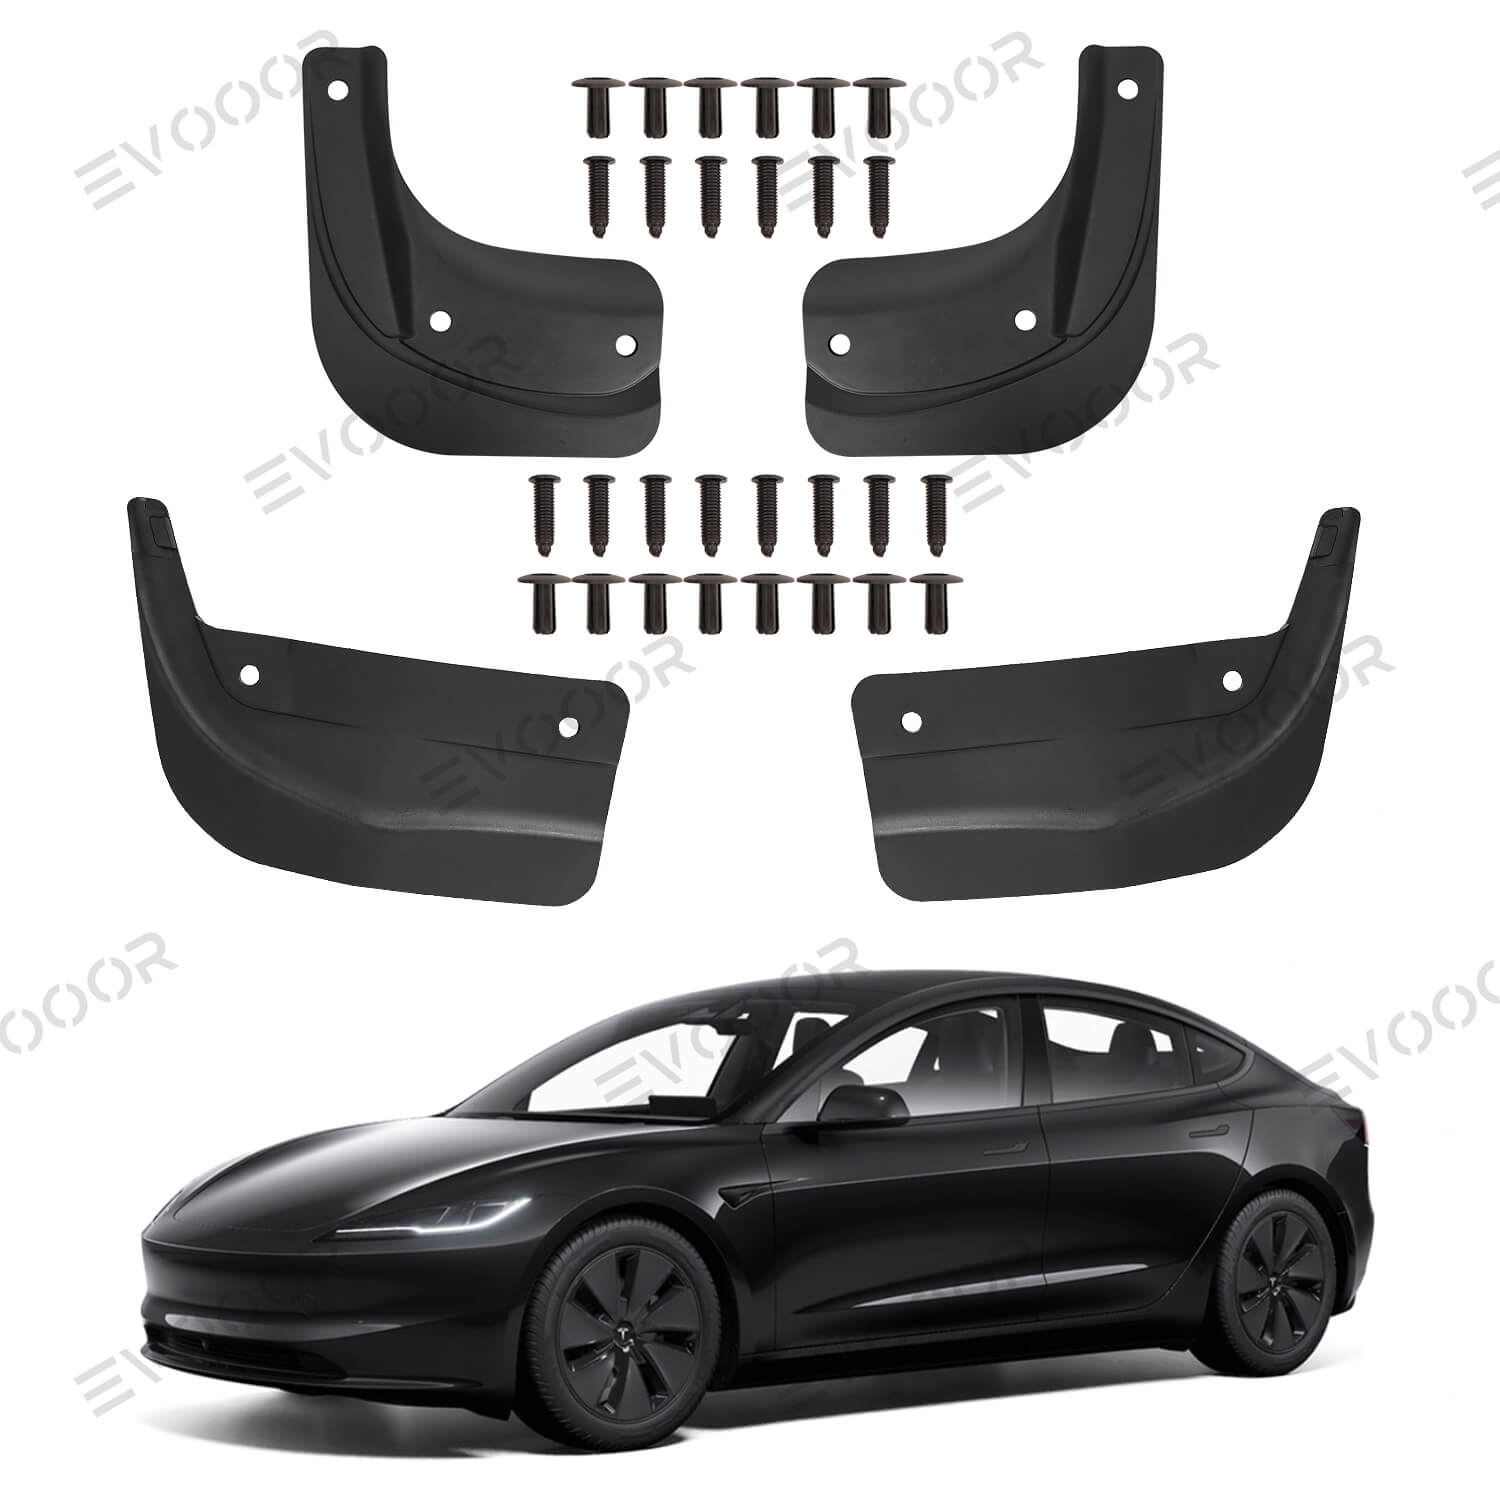 Tesla Model 3 Model Y Mud Flaps Front And Rear Kit By EV Parts Bay